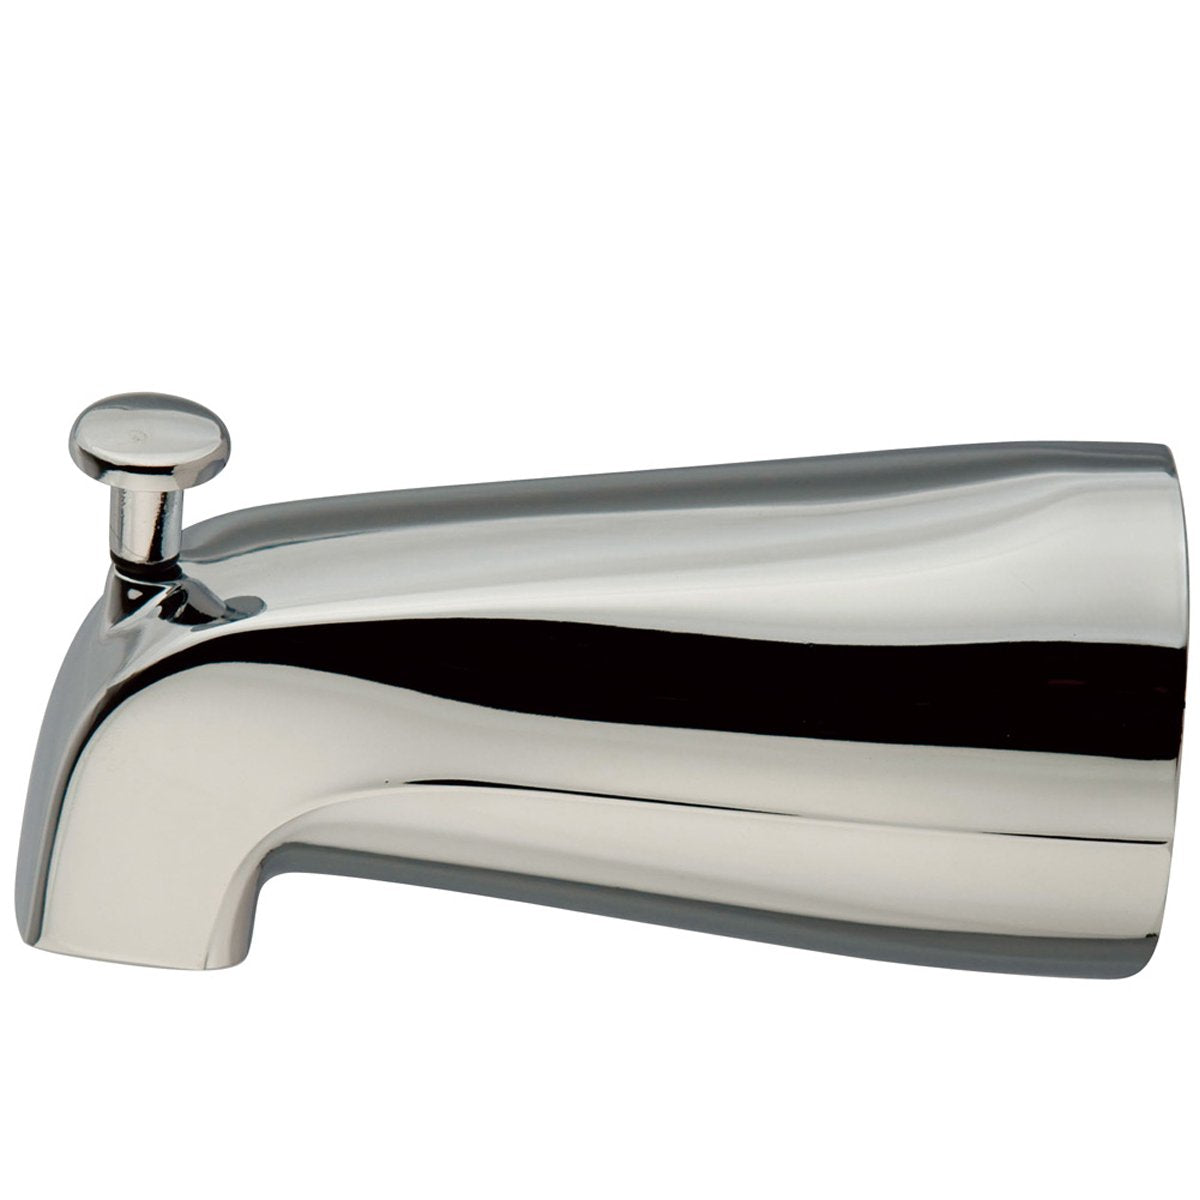 Kingston Brass Made to Match 5" Diverter Tub Spout-Bathroom Accessories-Free Shipping-Directsinks.